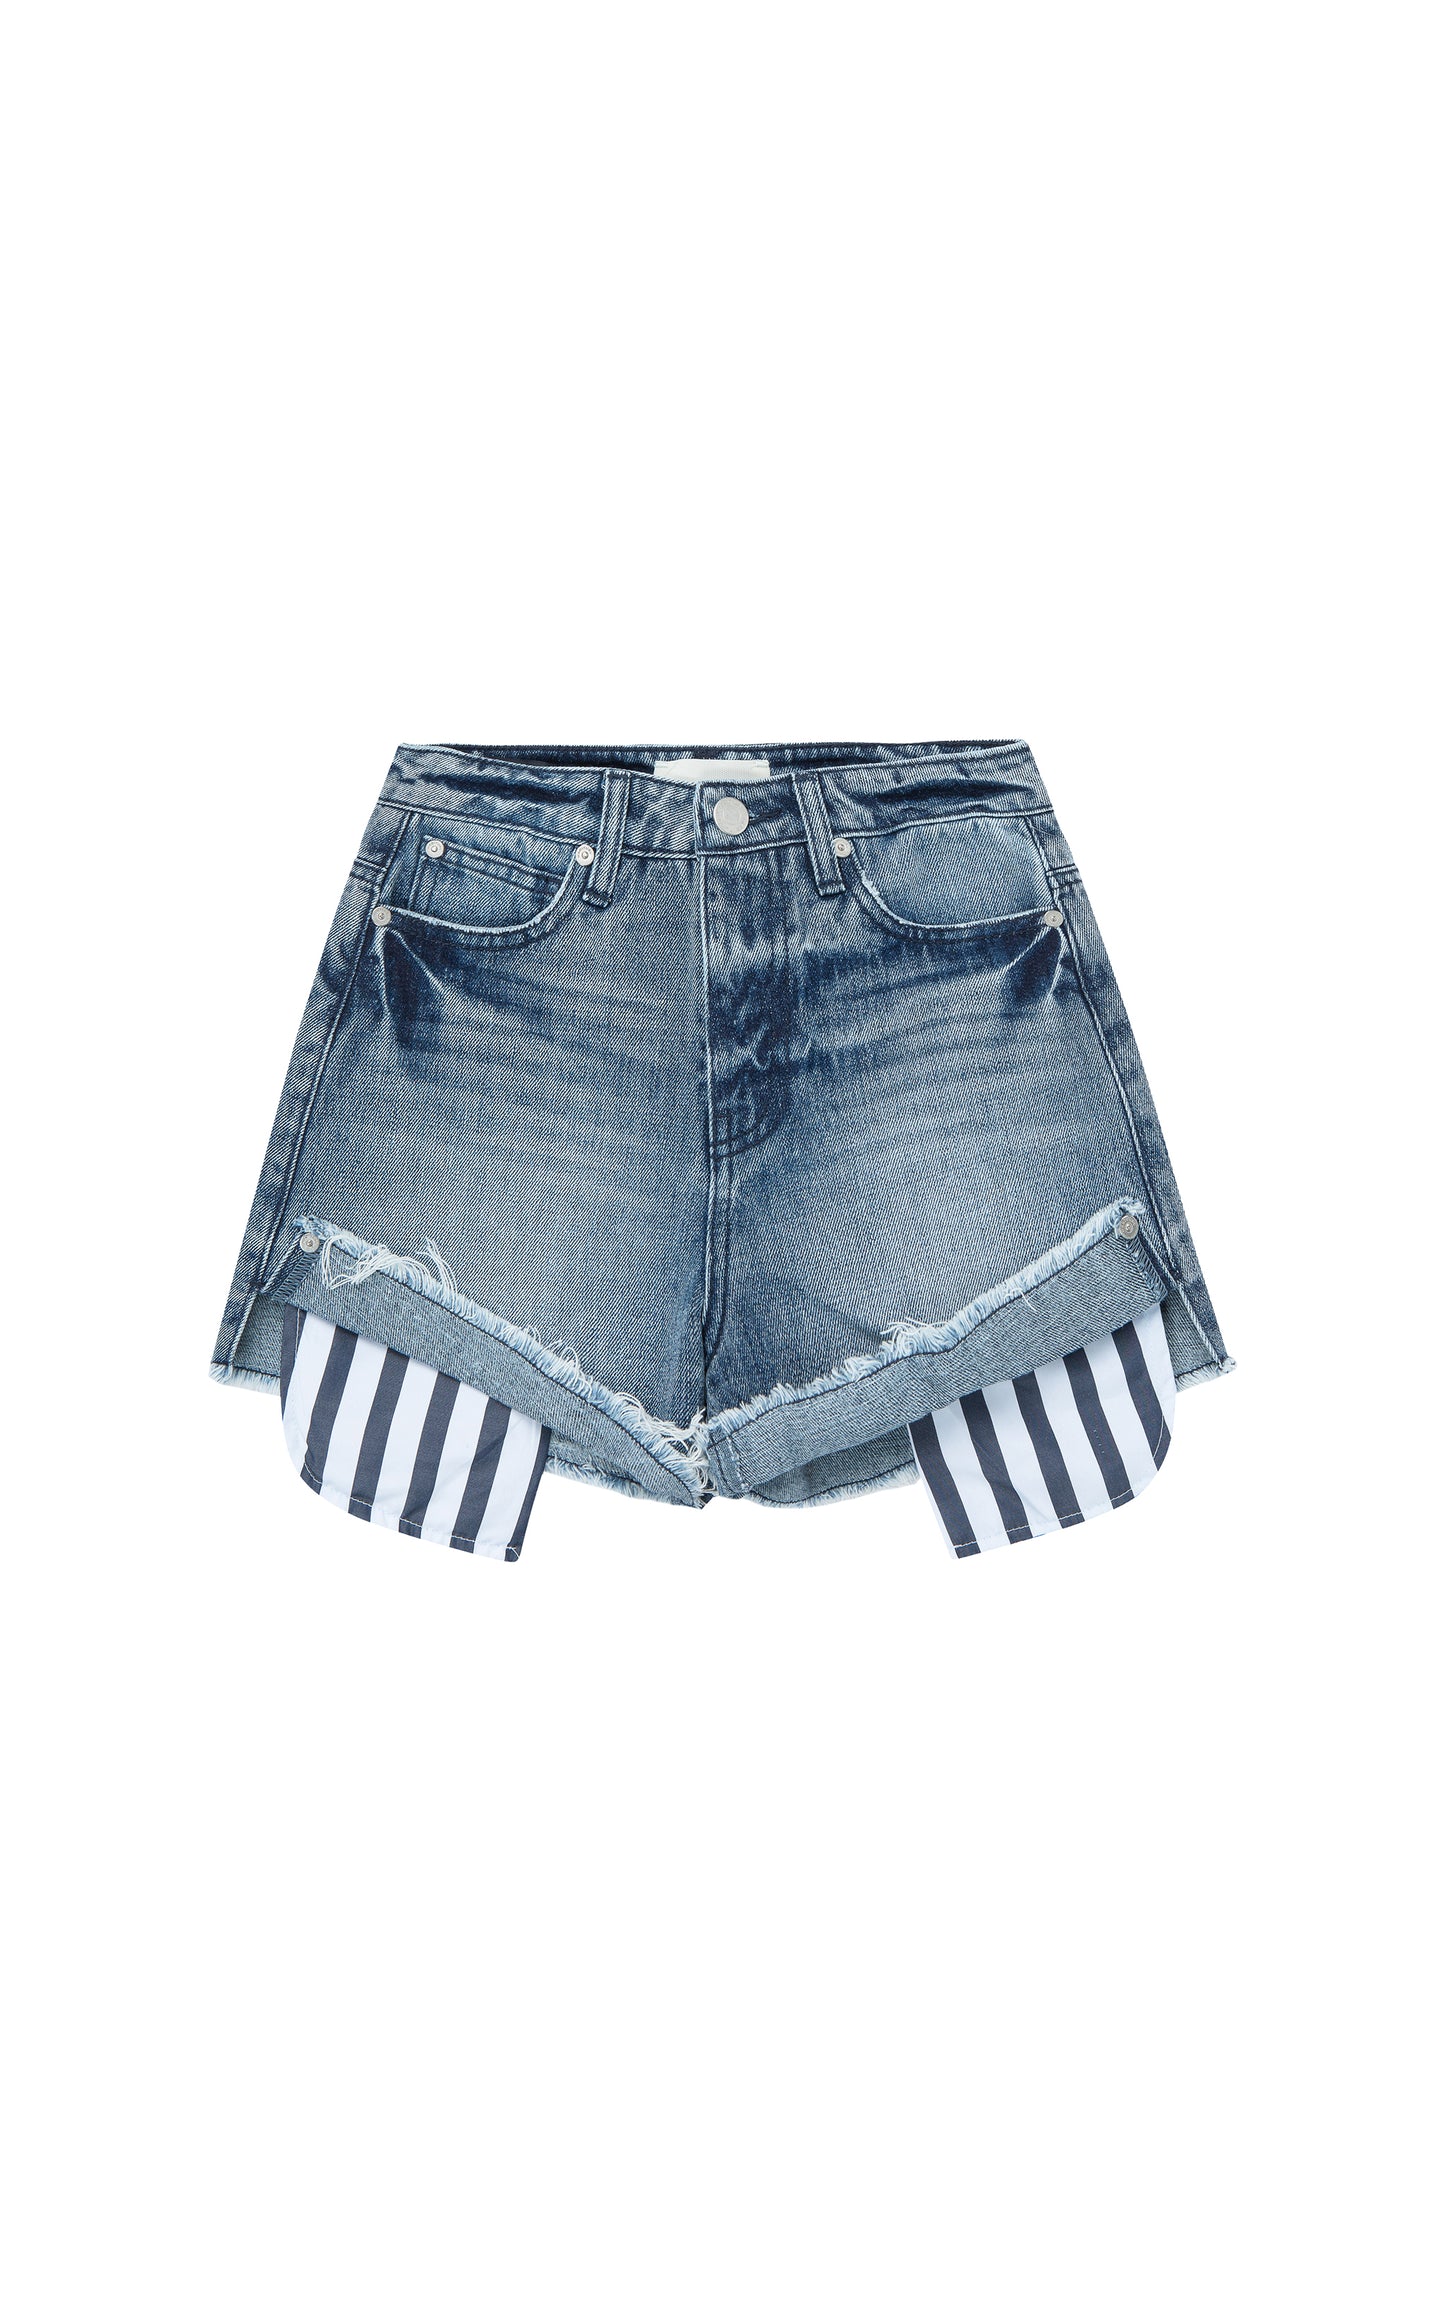 Denim shorts with blue-and-white striped exposed pockets